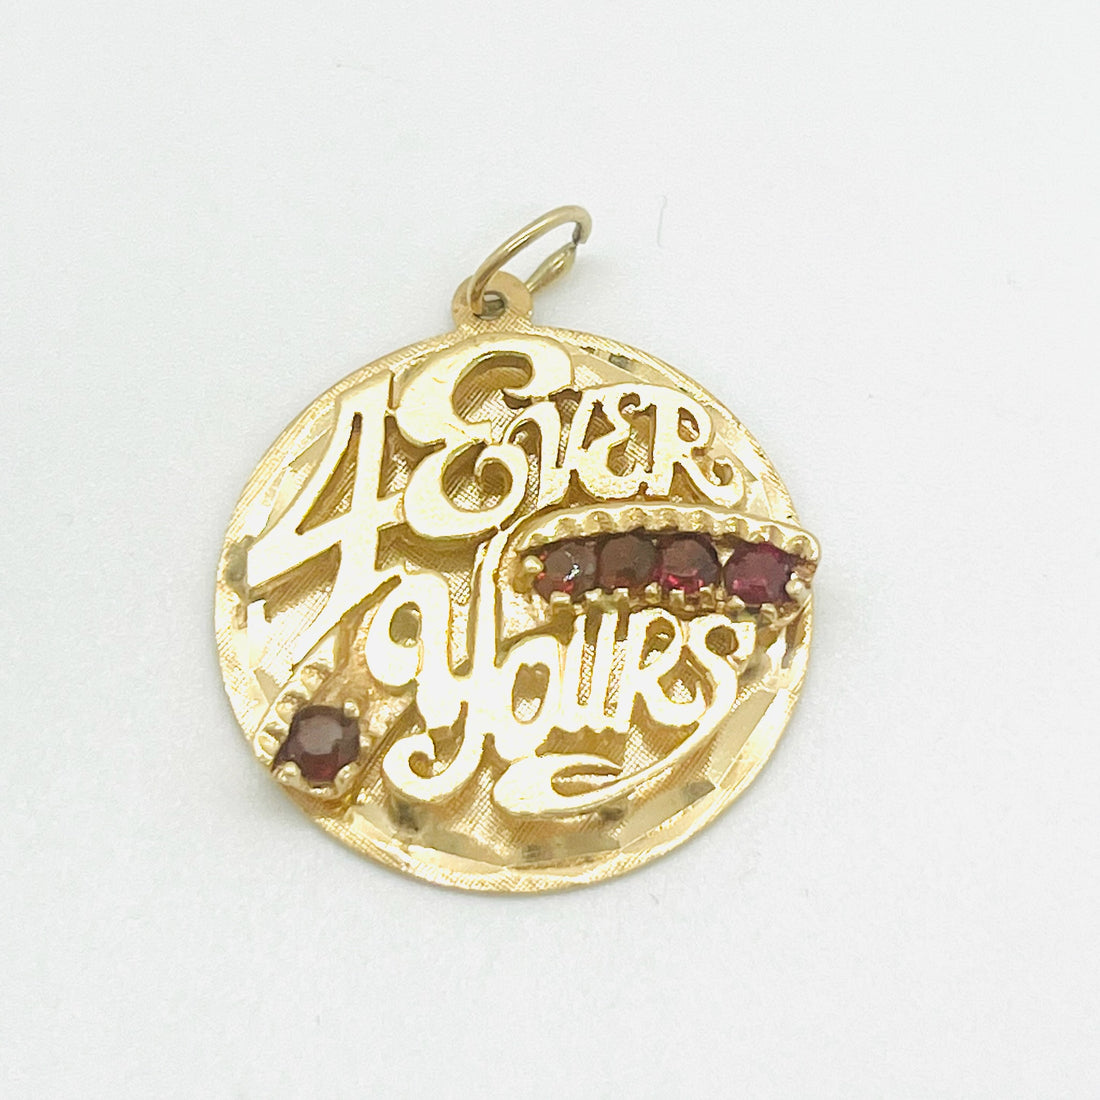 vintage 4-EVER yours charm